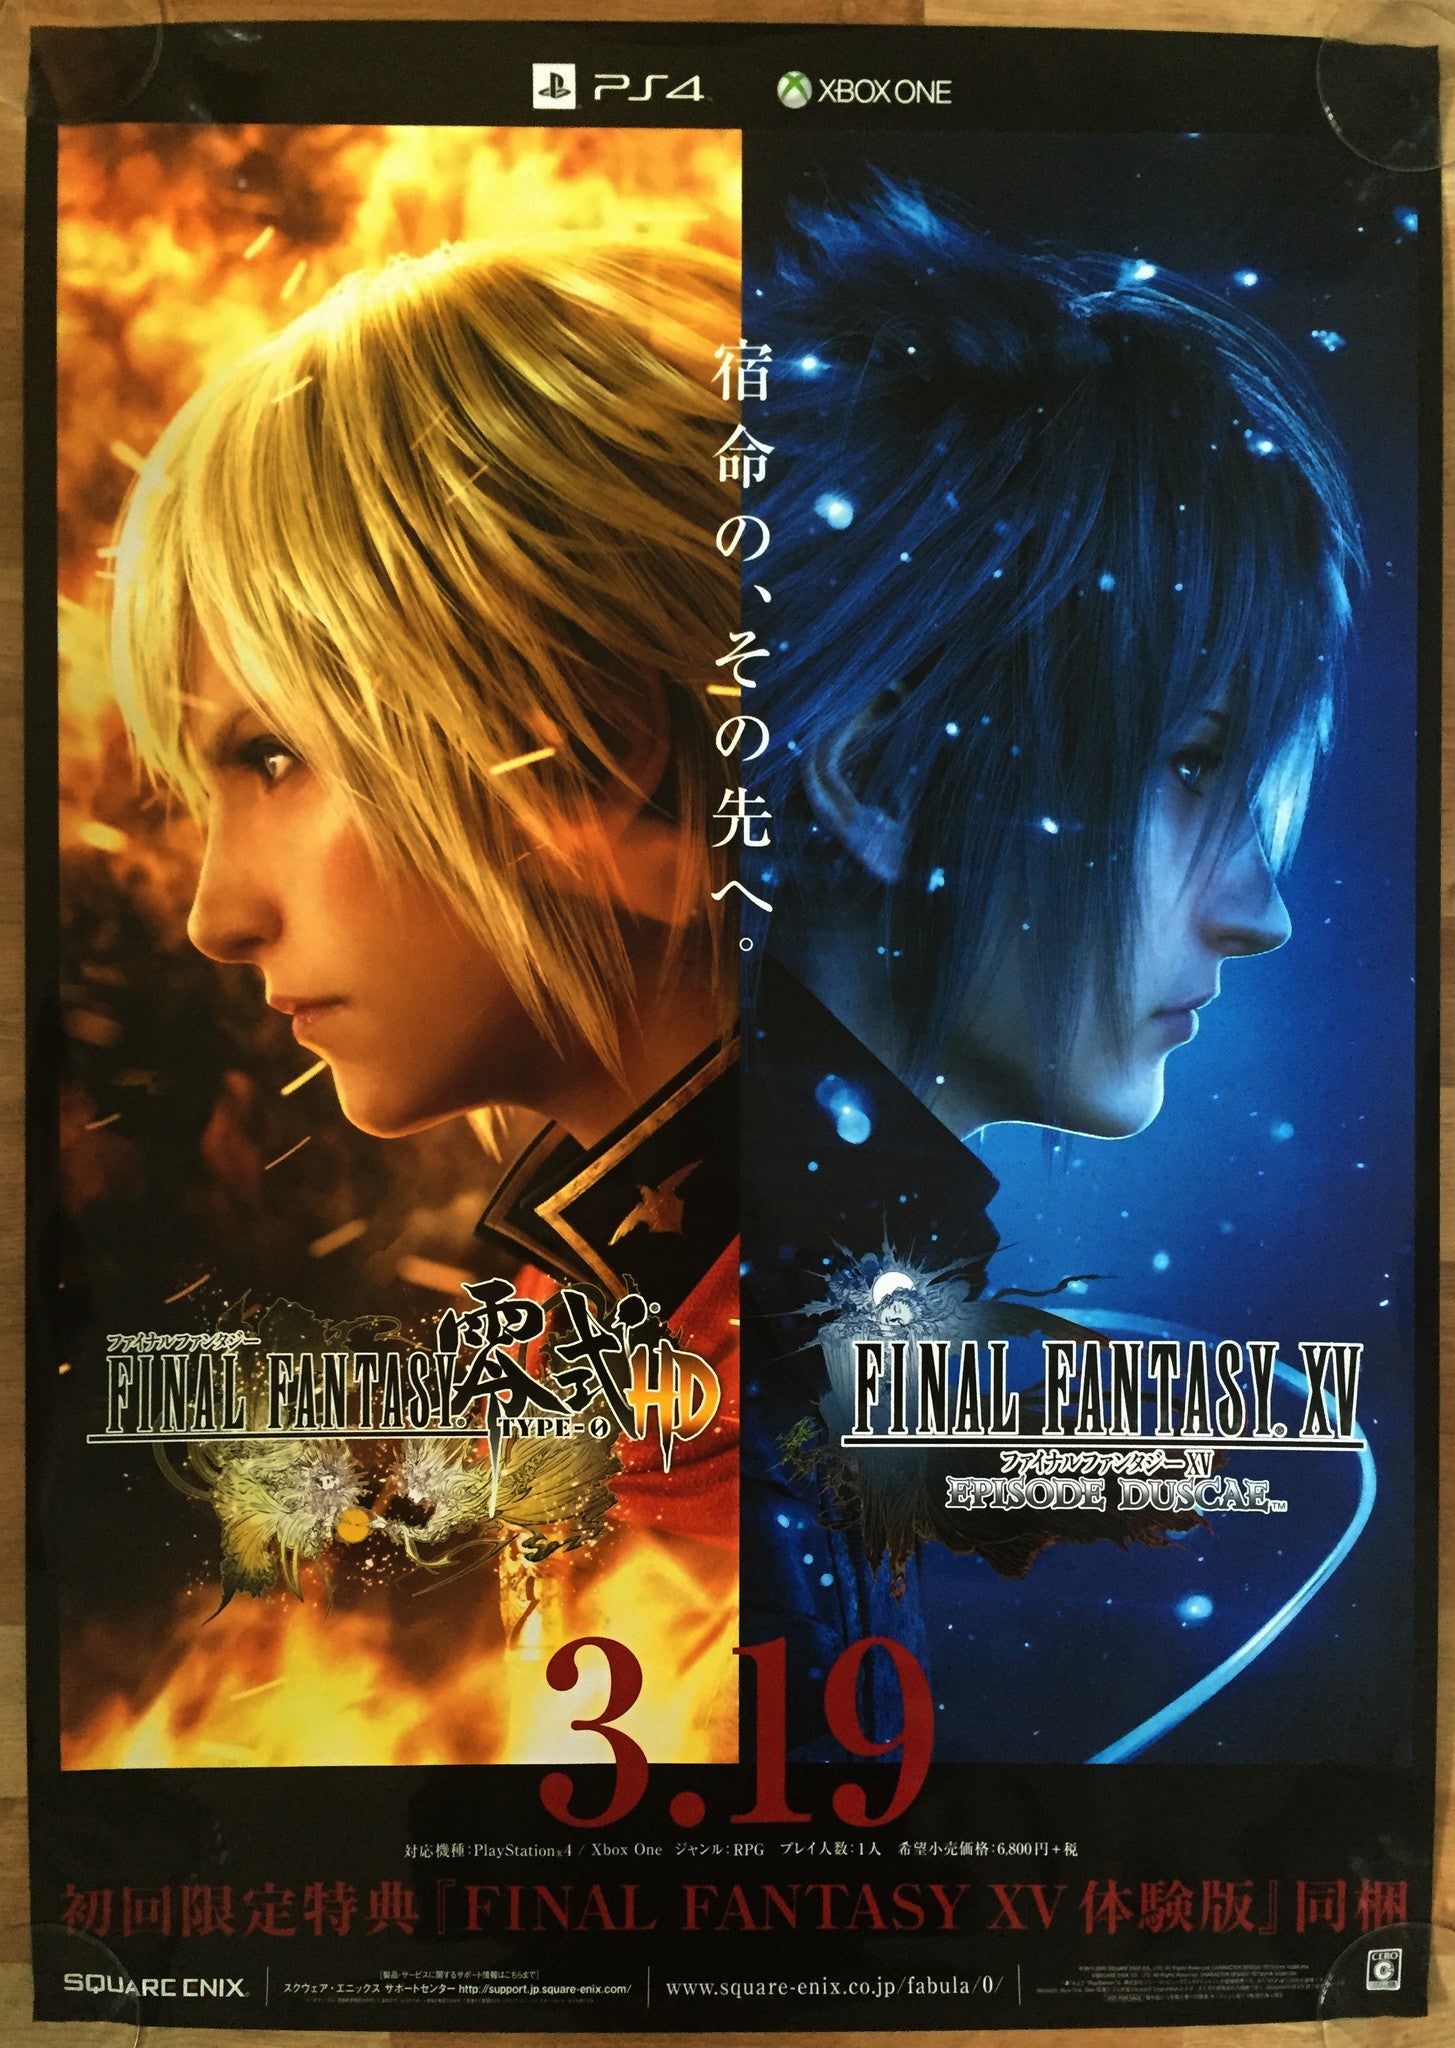 Final Fantasy: Type-O HD (B2) Japanese Promotional Poster #3